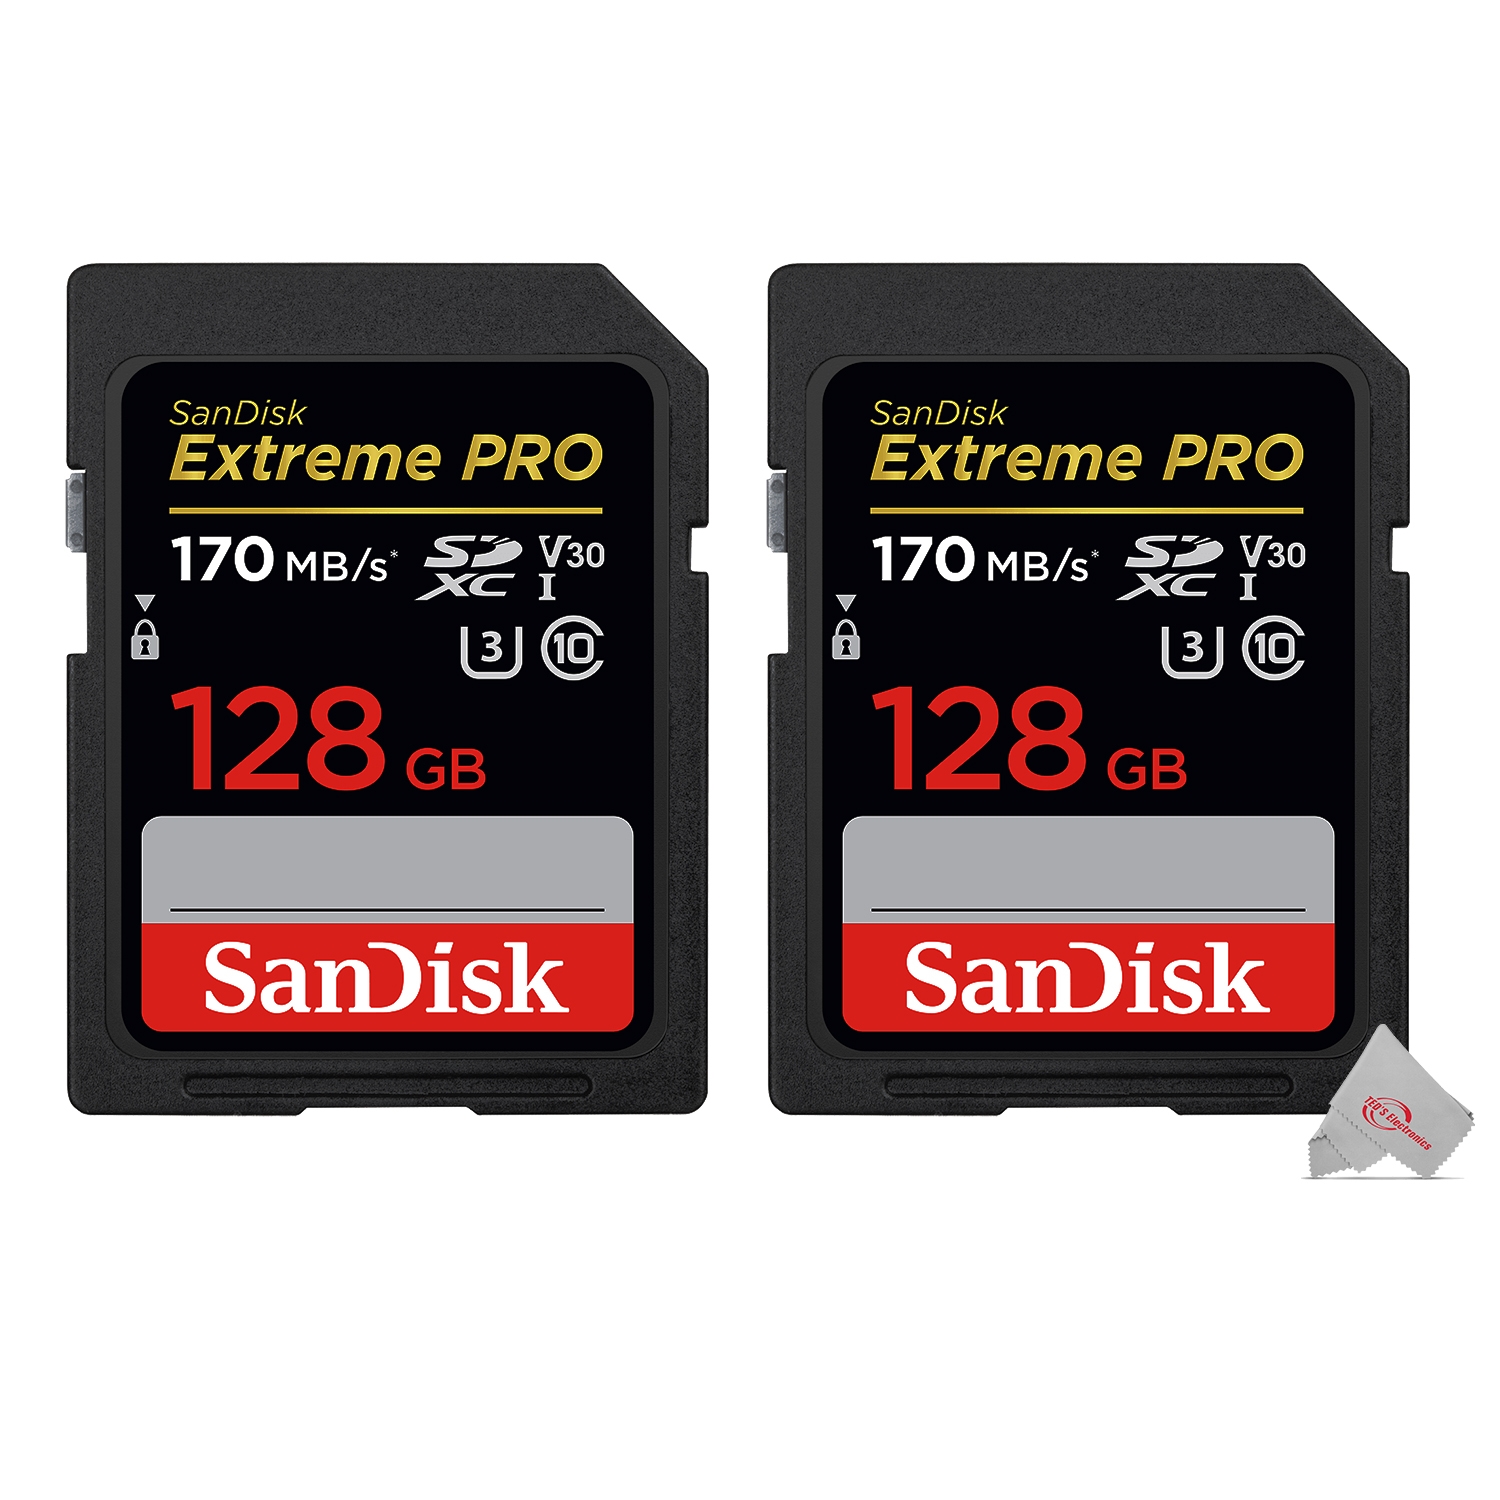 2x SanDisk Extreme Pro 128GB SDXC UHS-I/U3 V30 Class 10 Memory Card, Speed Up to 170MB/s (SDSDXXY-128G-GN4IN) - image 1 of 3